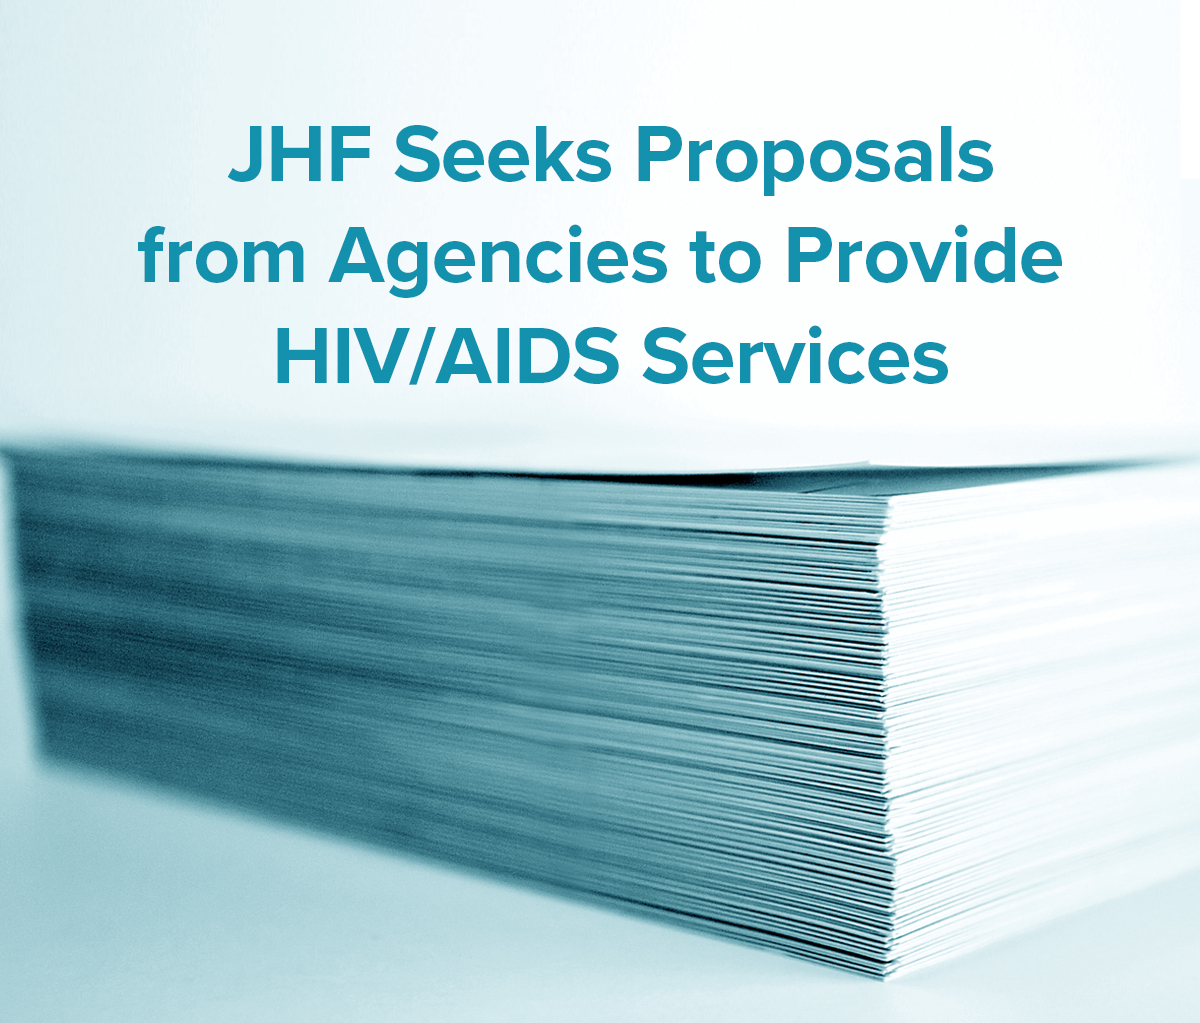 JHF Seeks Proposals from Agencies to Provide HIV/AIDS Services